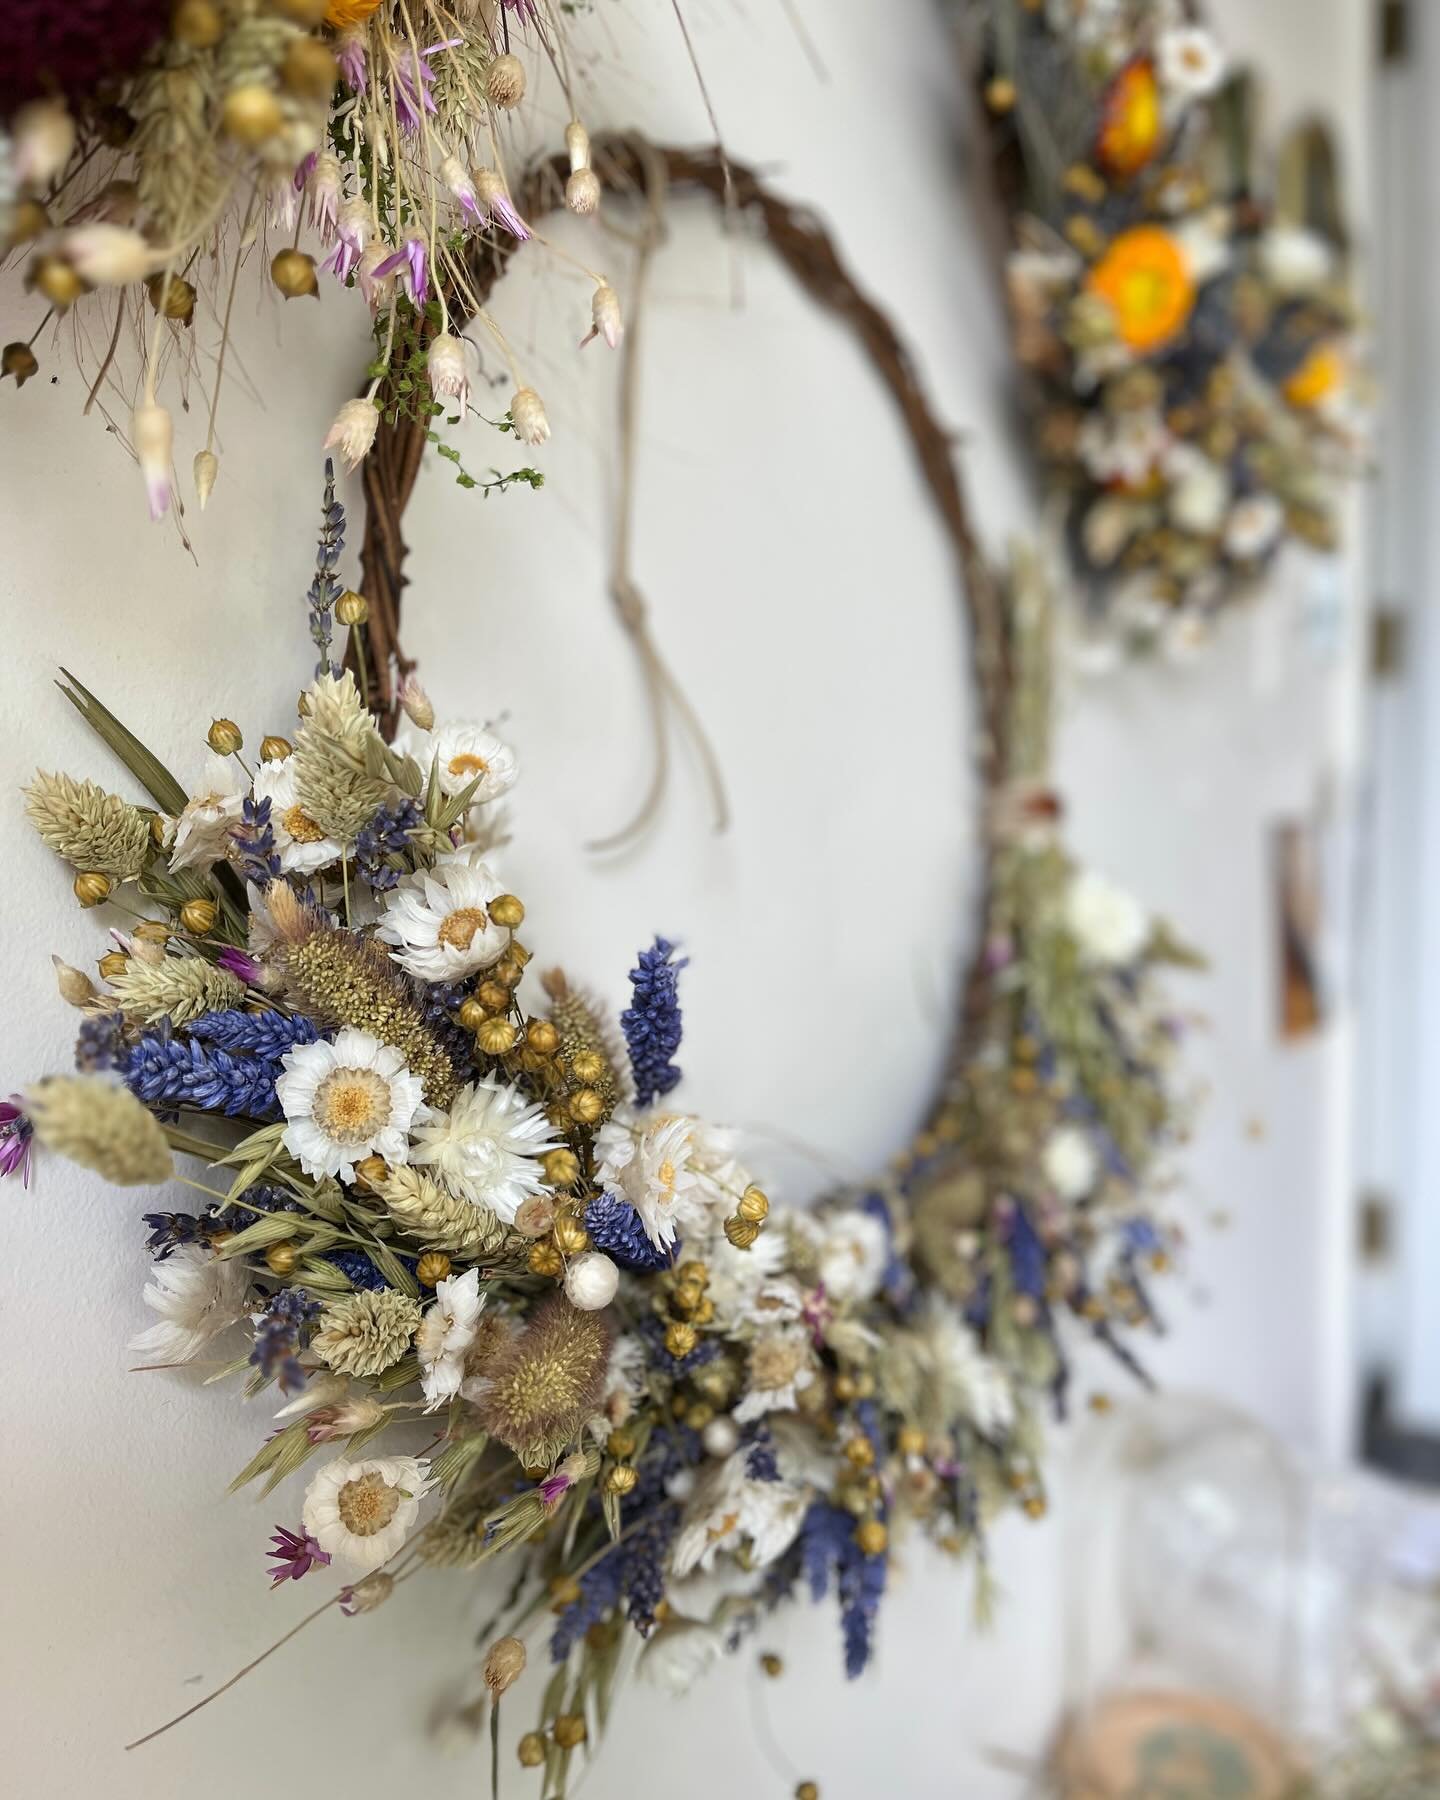 Sunday ☀️ May 19th, Home@&amp; Garden festival @chestnuthill_pa 🌸 see you there! #driedflower #driedflowers #driedflowerdecor#driedflowerdecoration #ohiladelphiaevents #festivals #springfestival #flowers